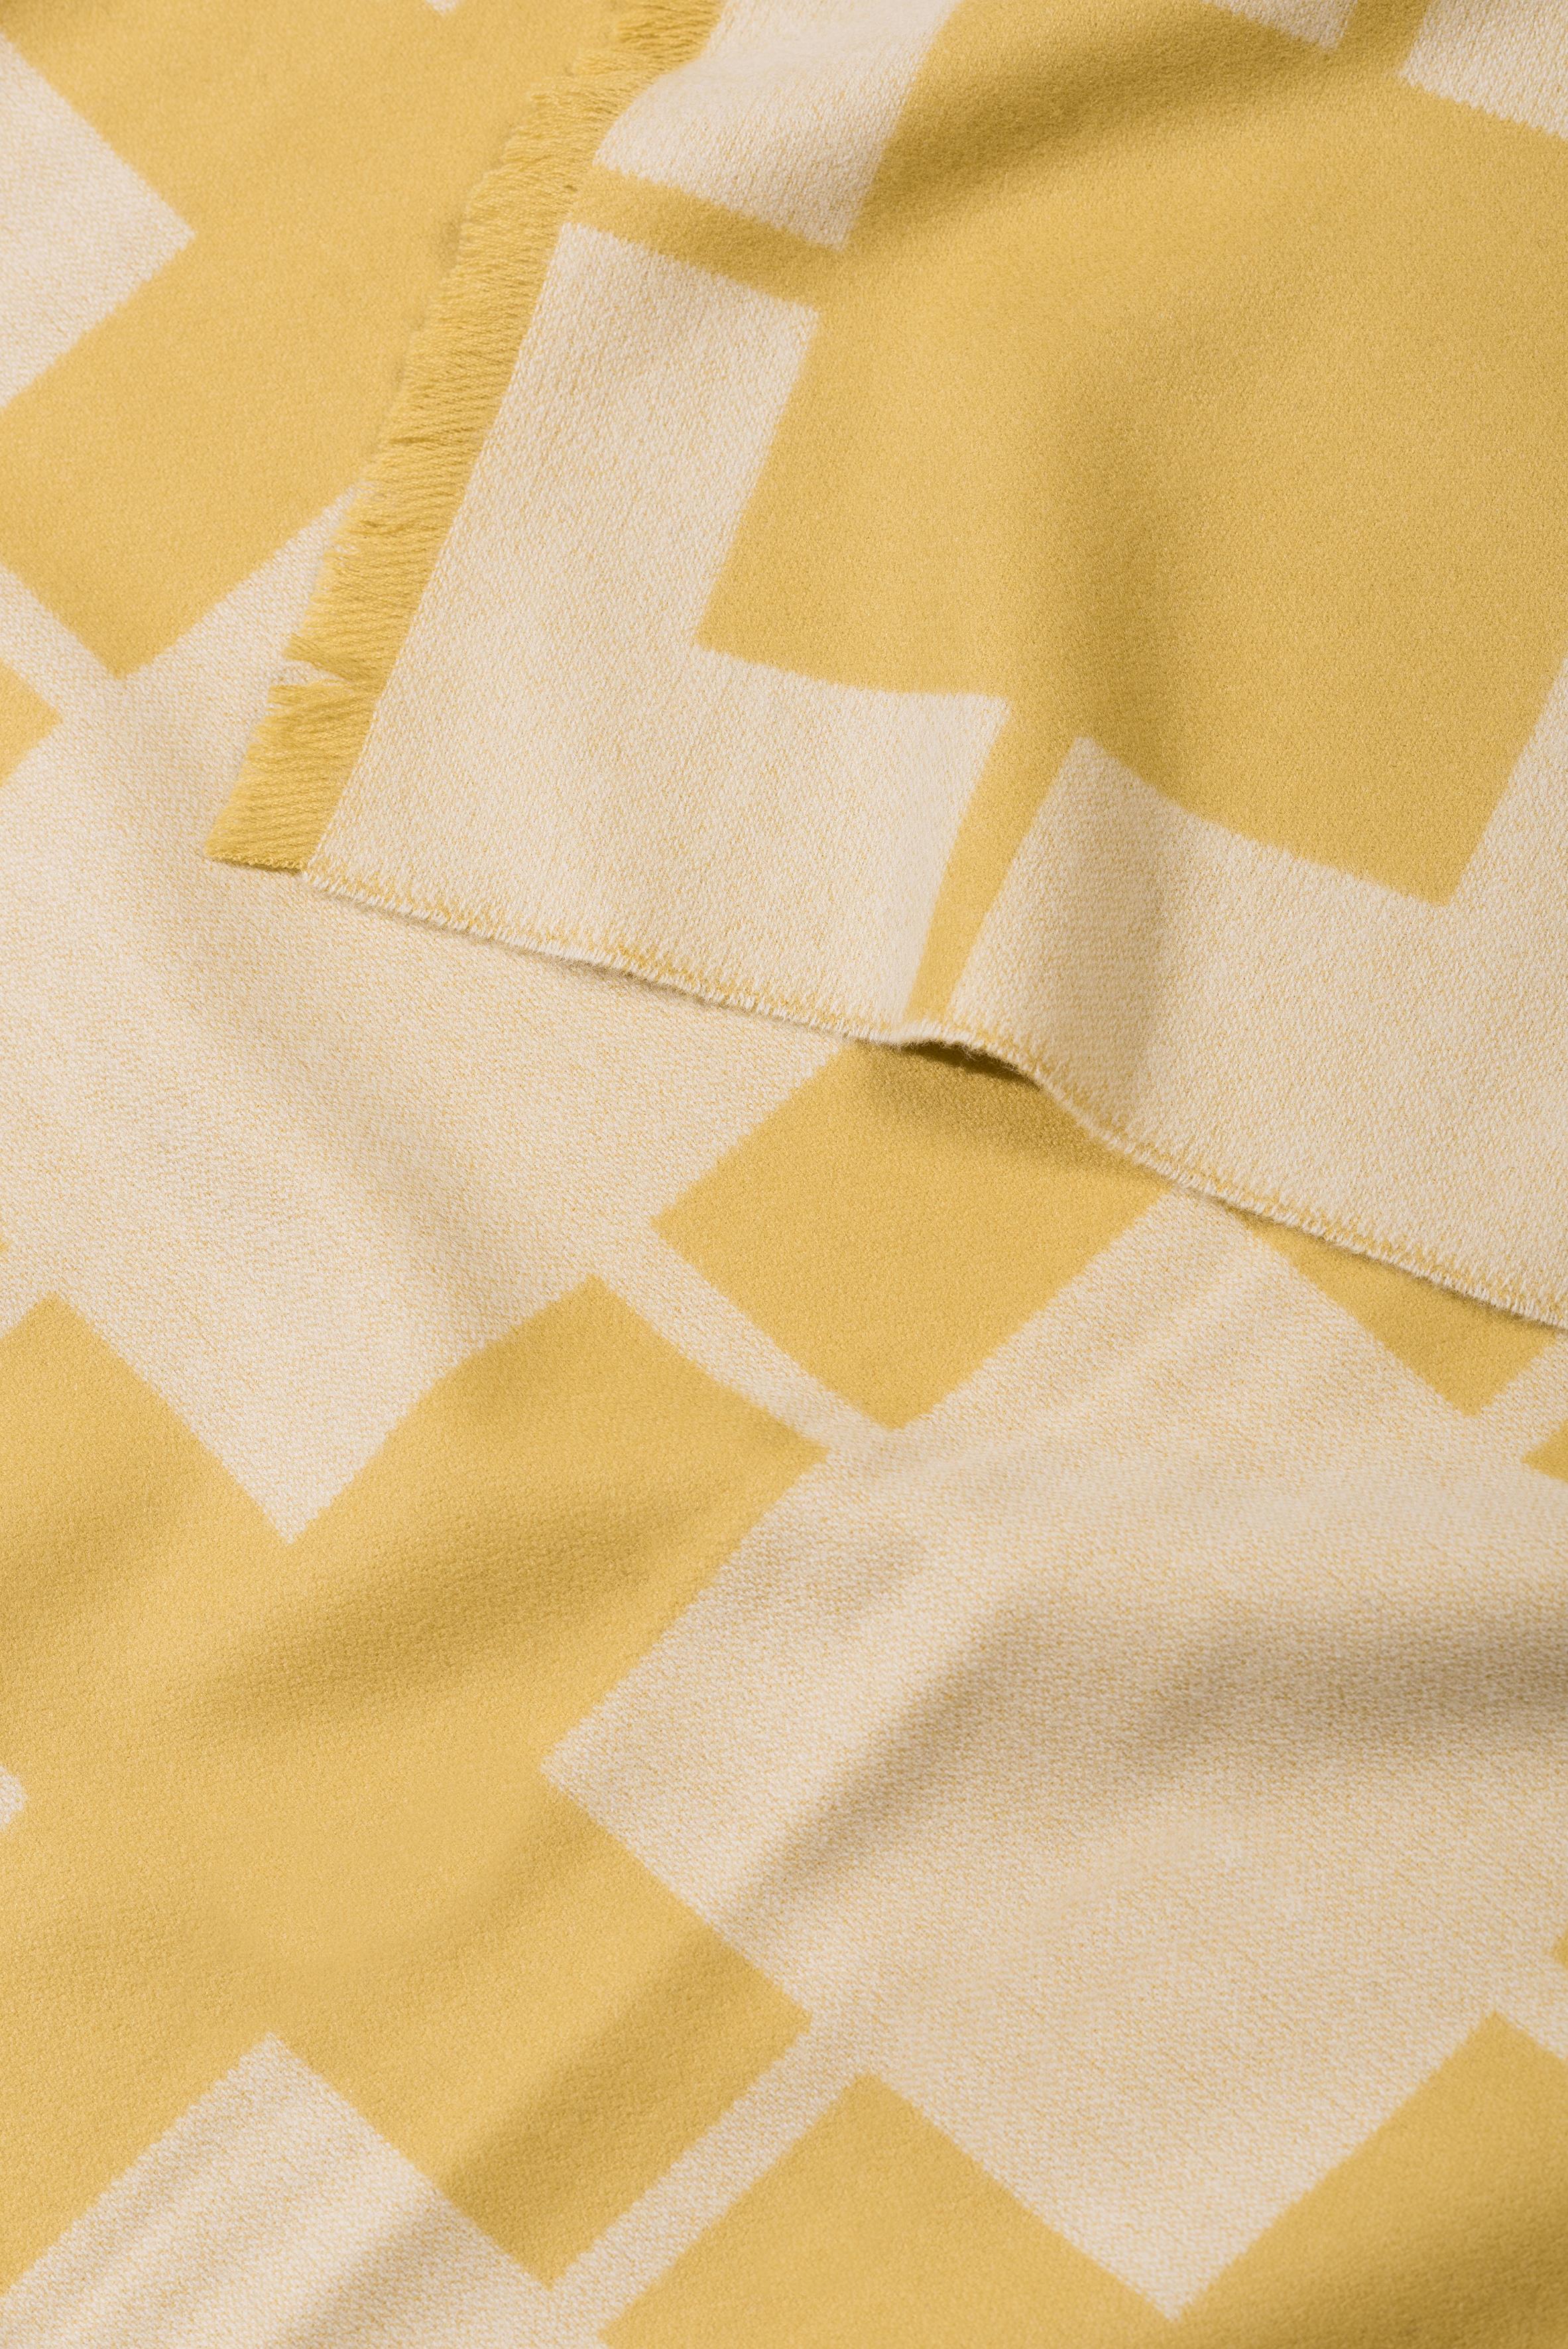 Contemporary Throw Blanket Pattern Yellow Beige Woven of Extra Fine Merino by Catharina Mende For Sale